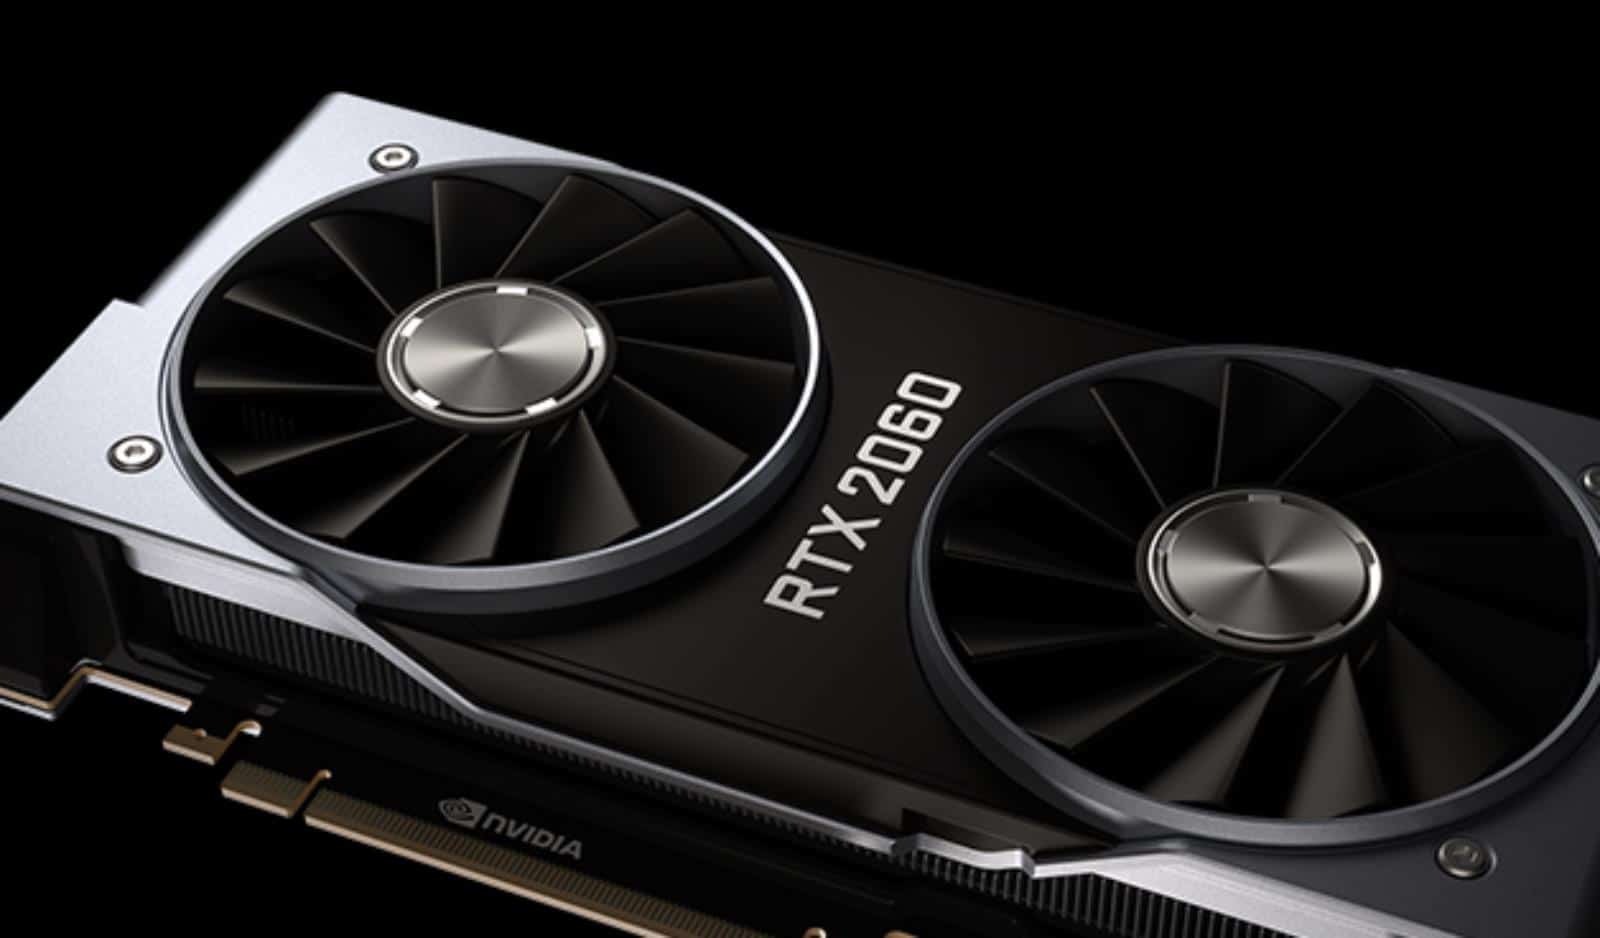 Graphic rescue on the horizon?  NVIDIA could overturn the older mainstream king